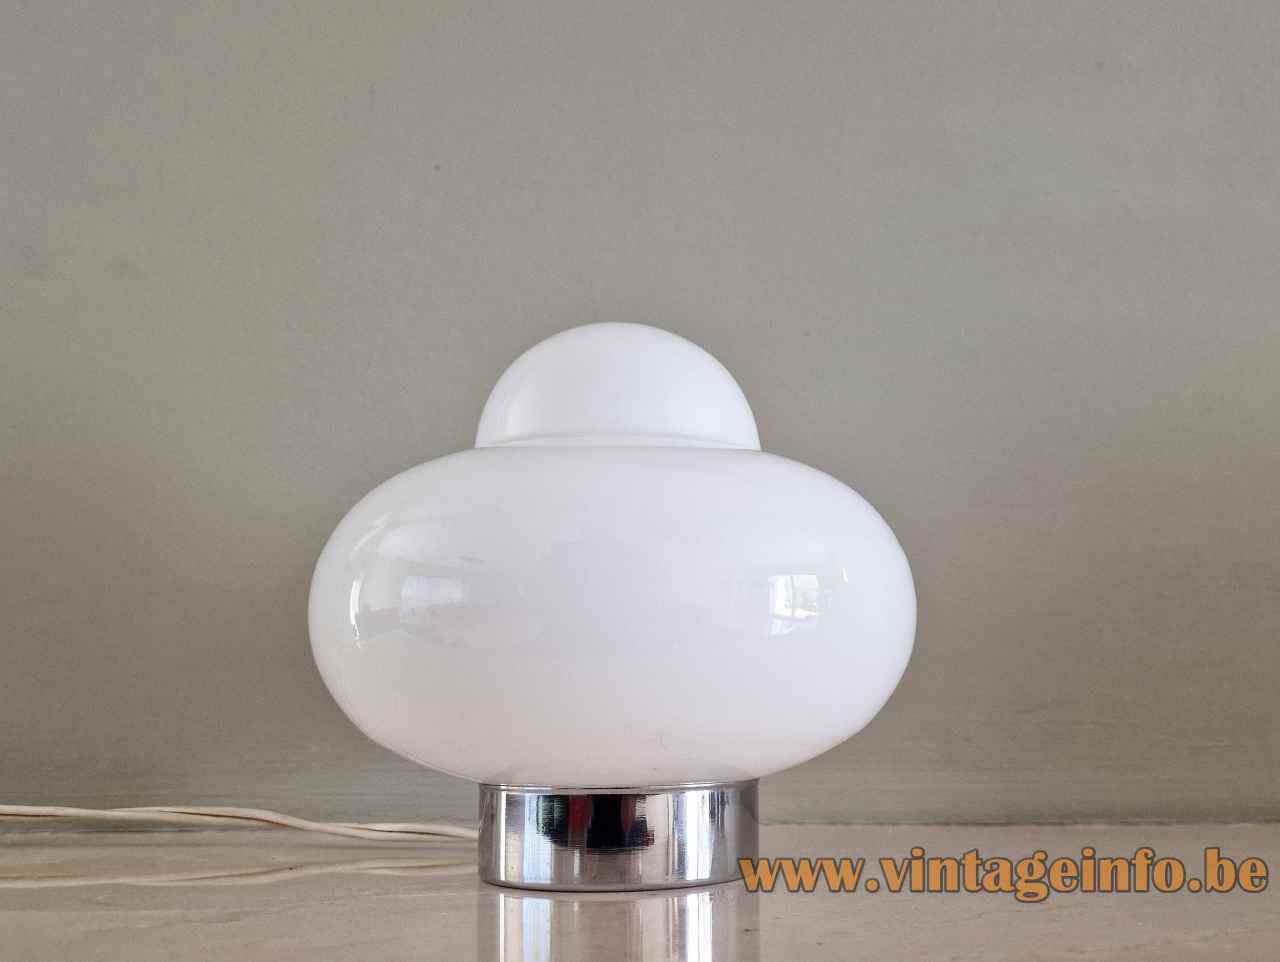 Massive Electra style table lamp round chrome base white opal glass lampshade 1970s 1980s Belgium 